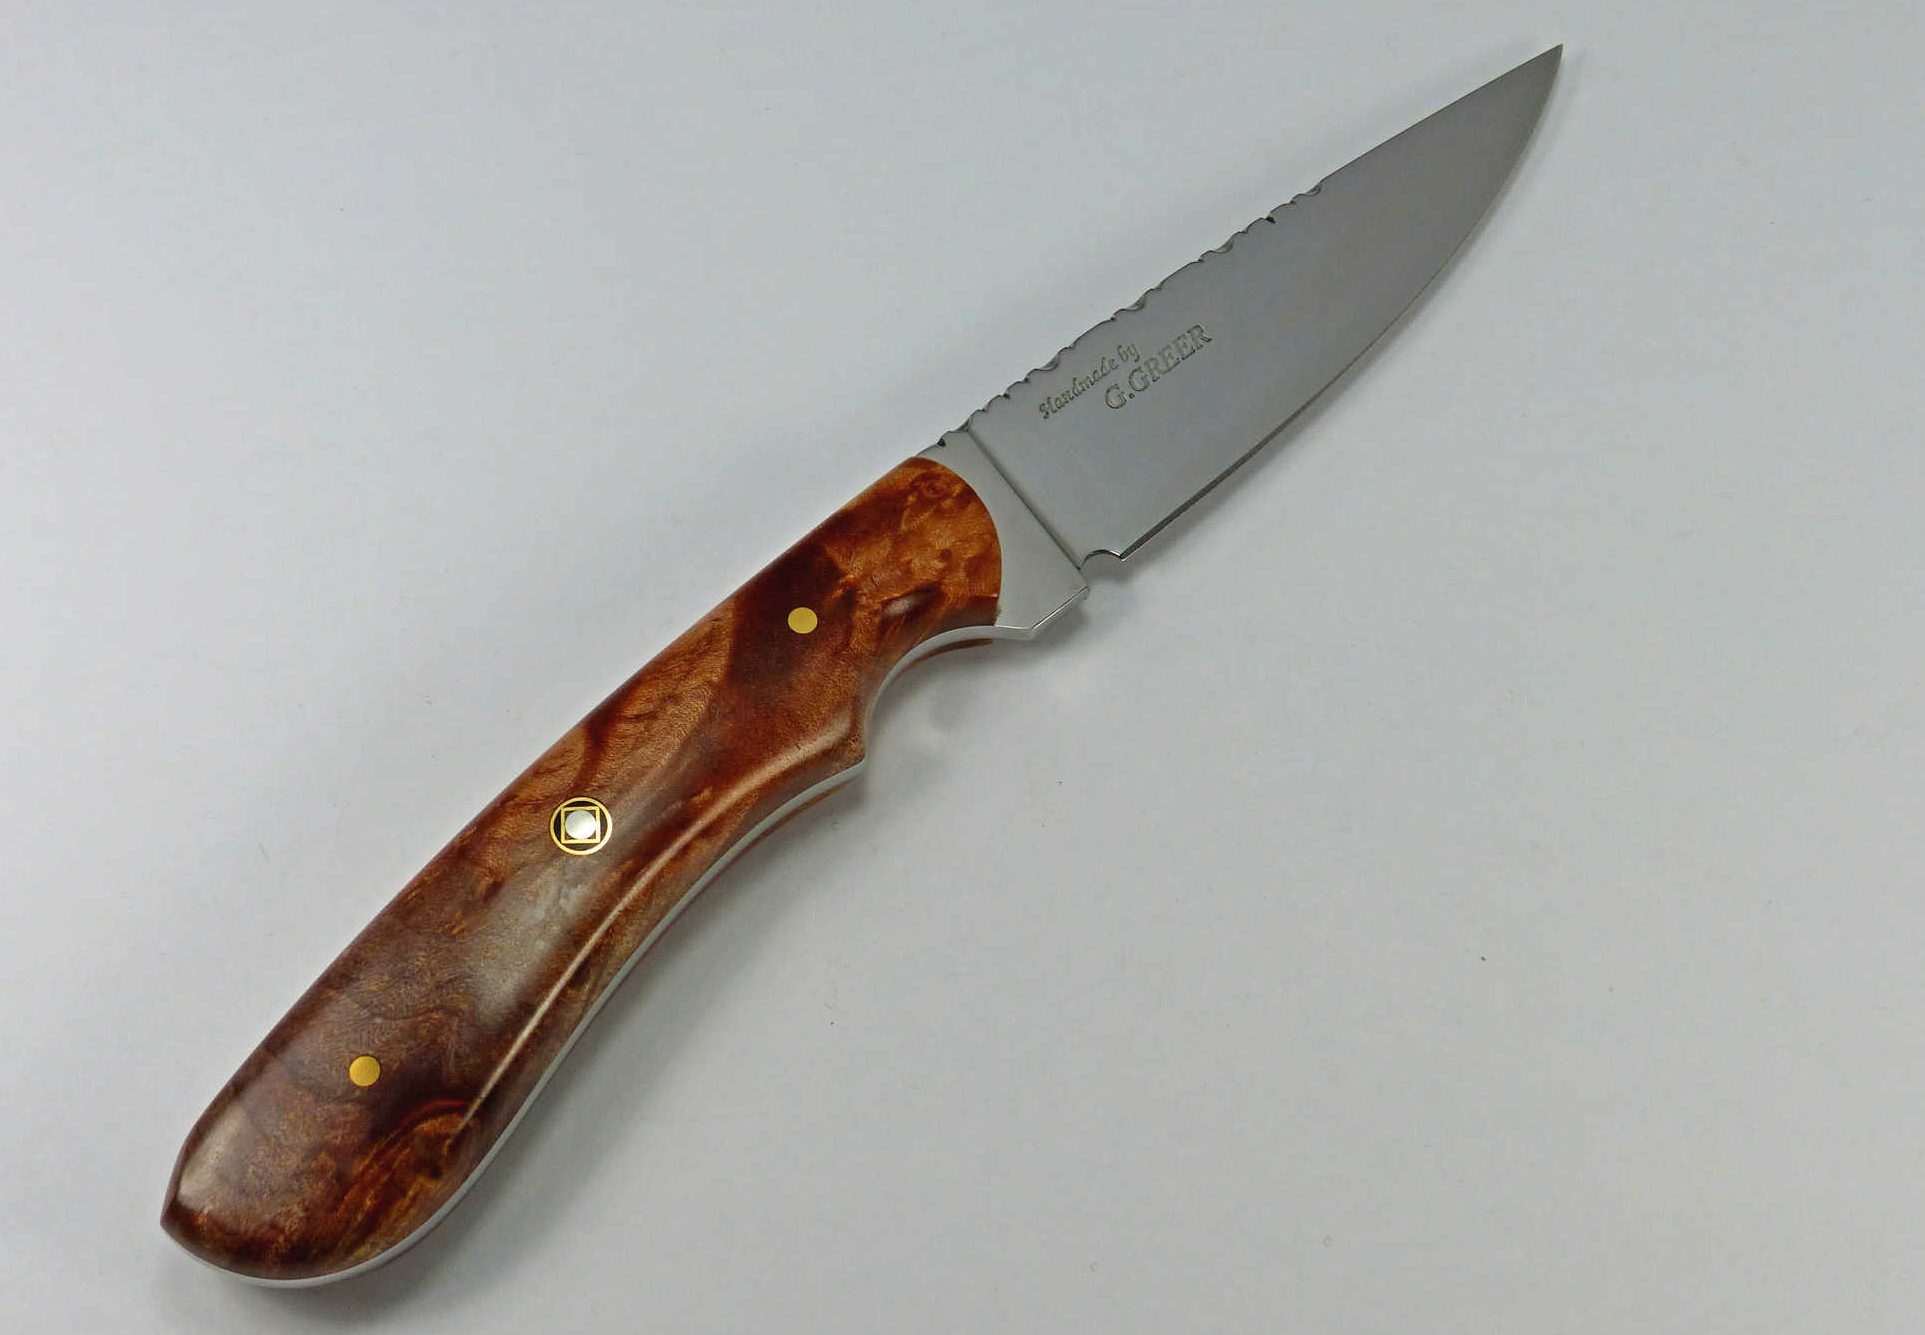 Great two-toned brown figured maple sportsman knife with drop point blade